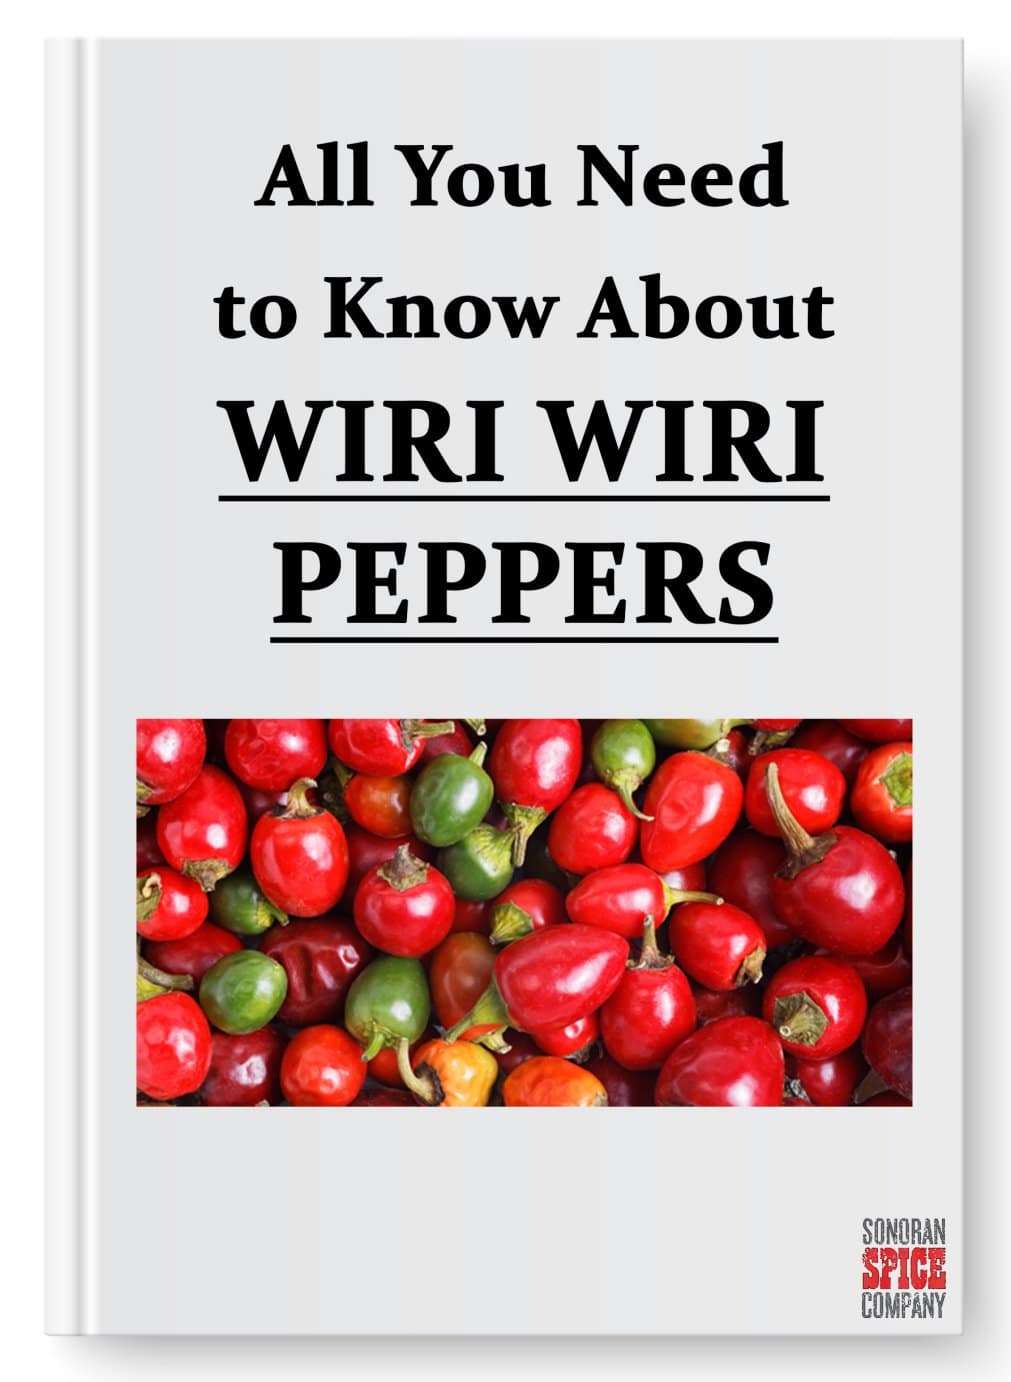 All You Need to Know About Wiri Wiri Peppers